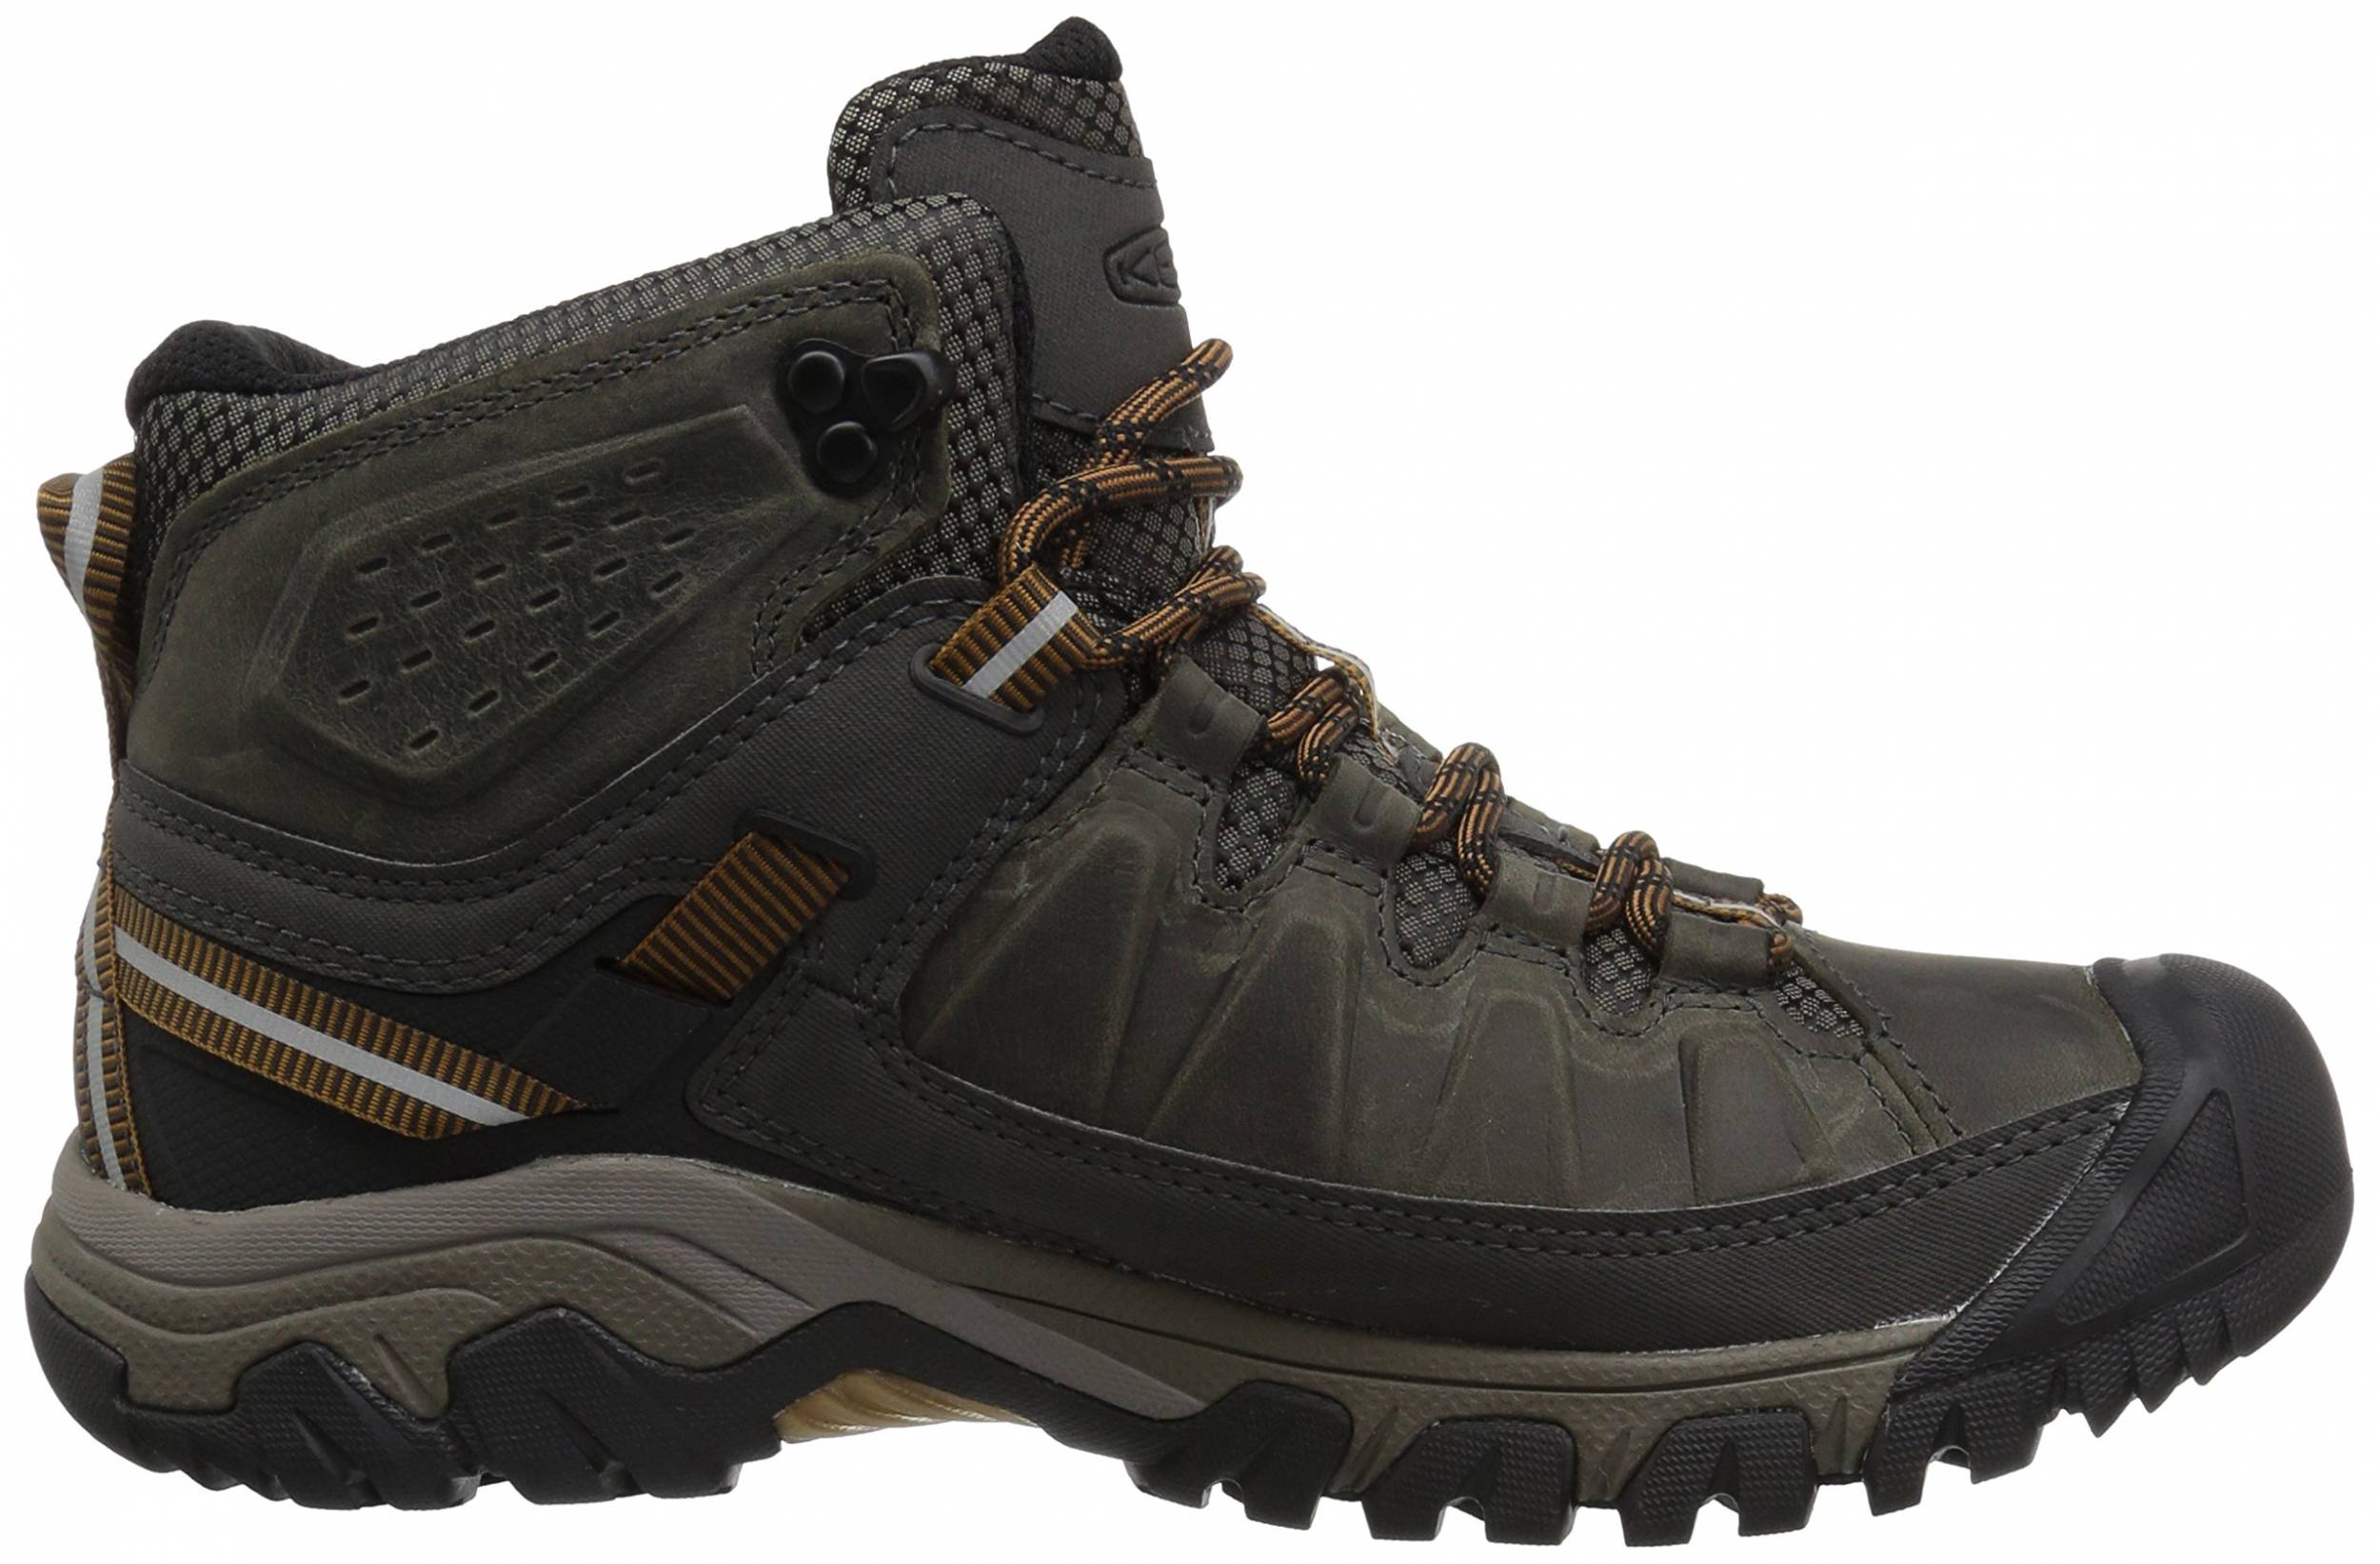 Save 26% on Wide Hiking Boots (97 